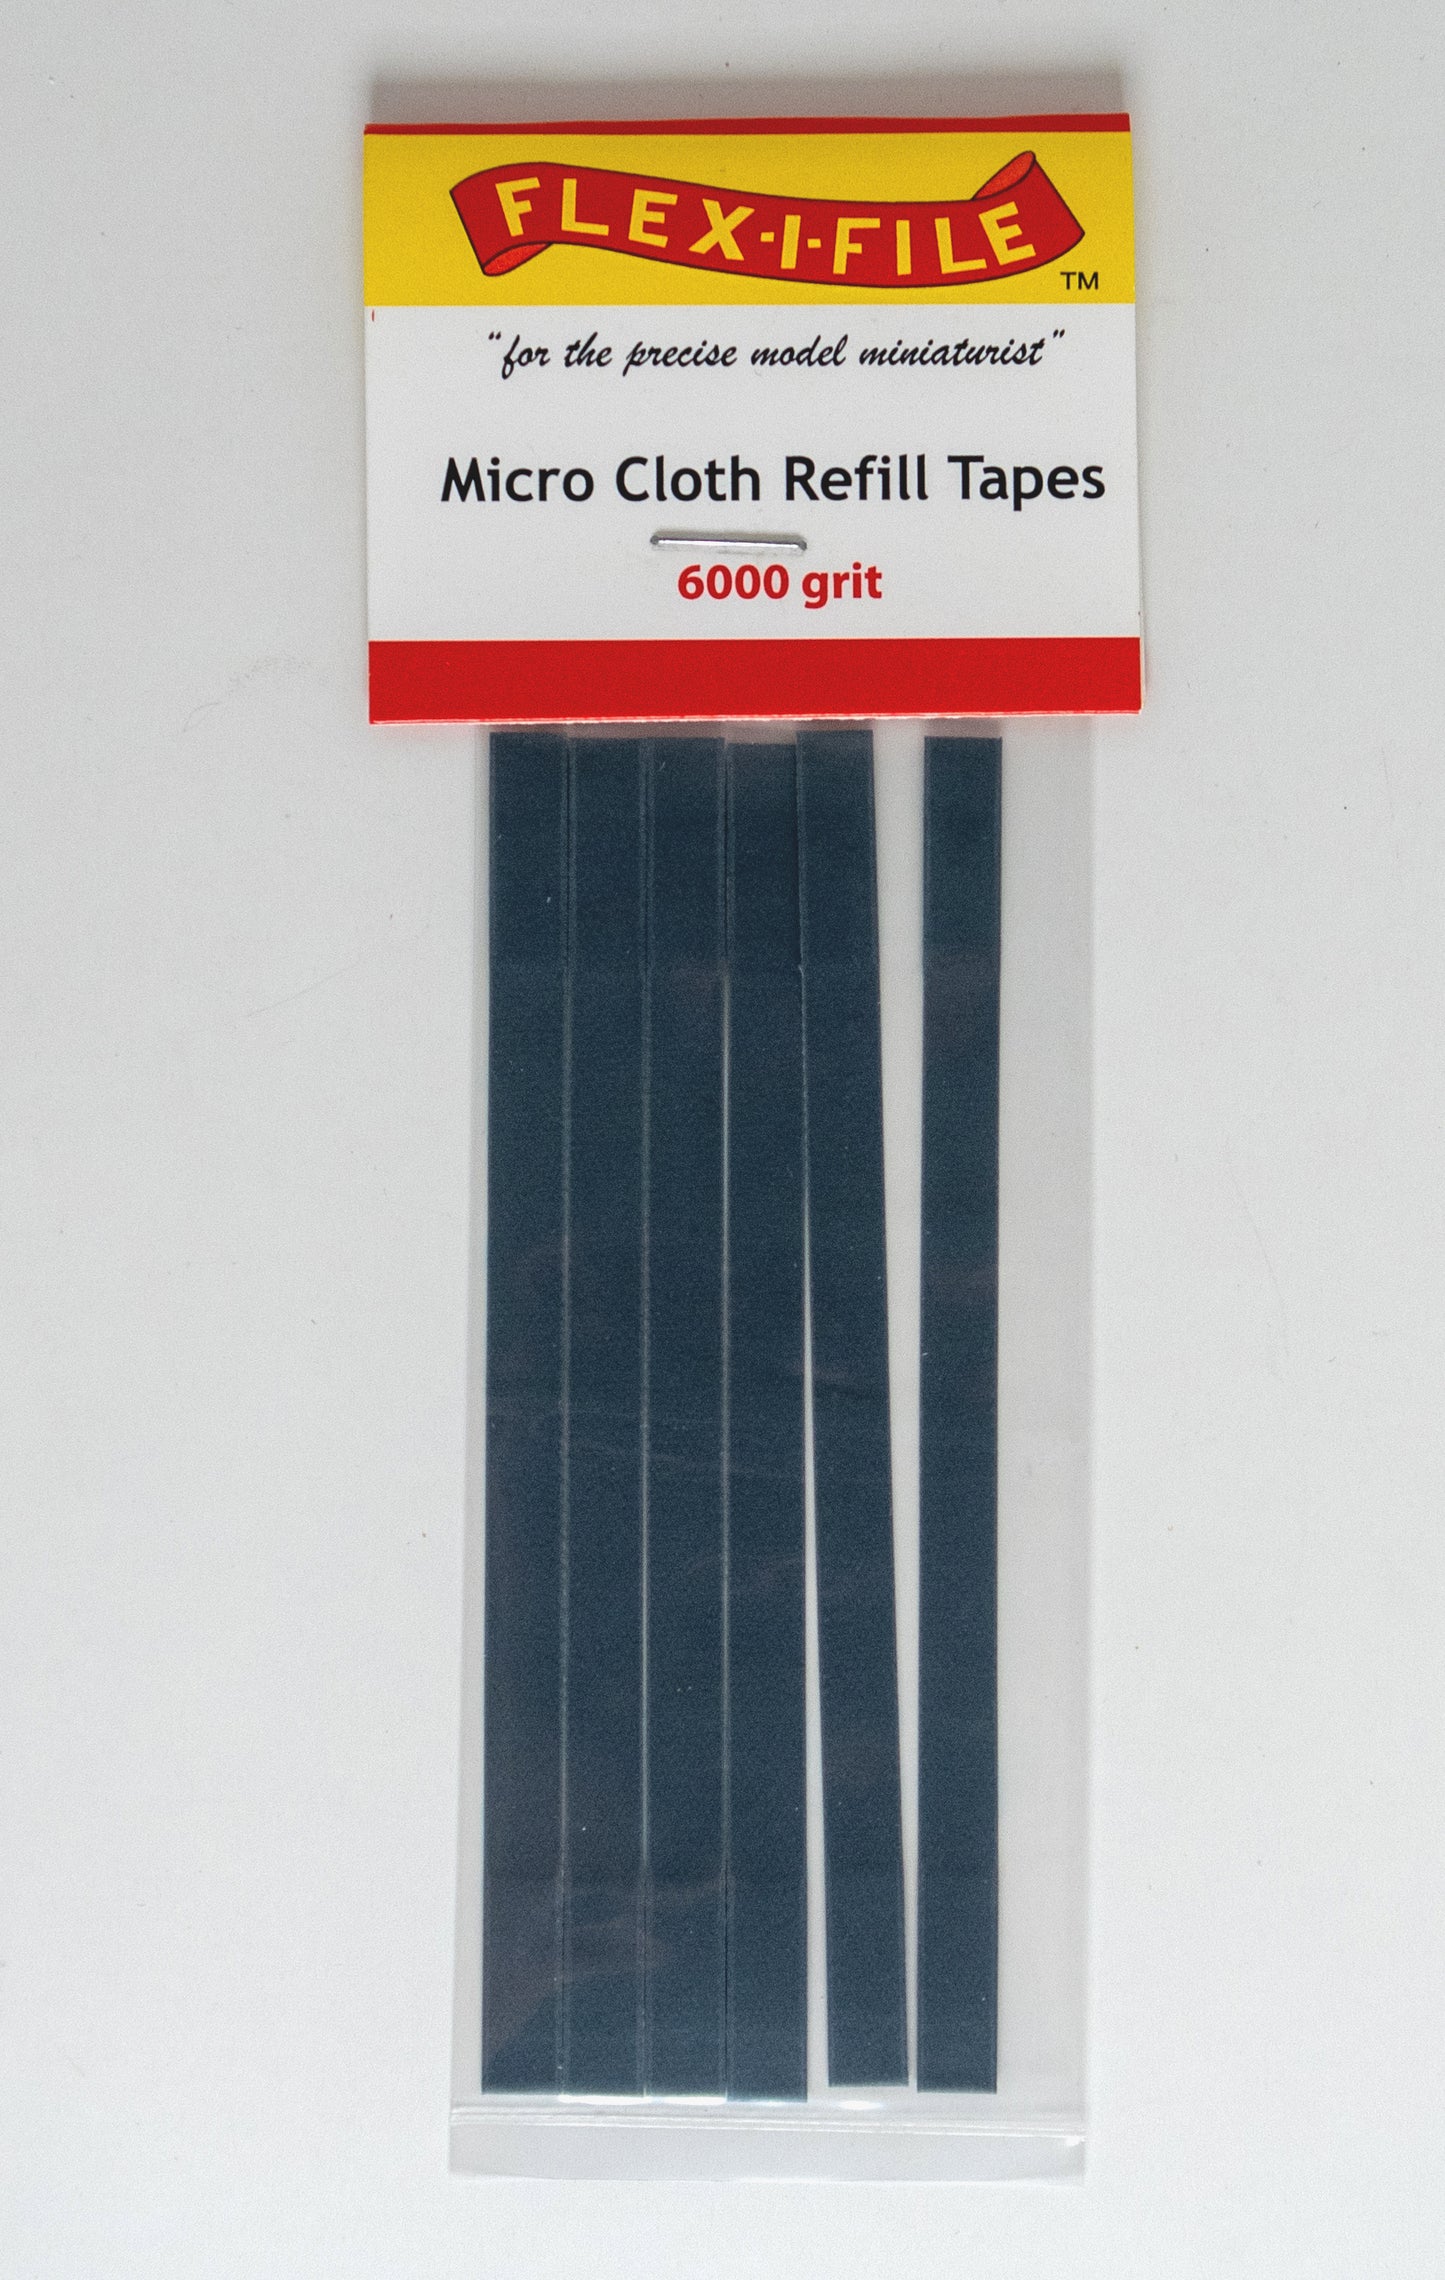 Micro Cloth Refill Tapes